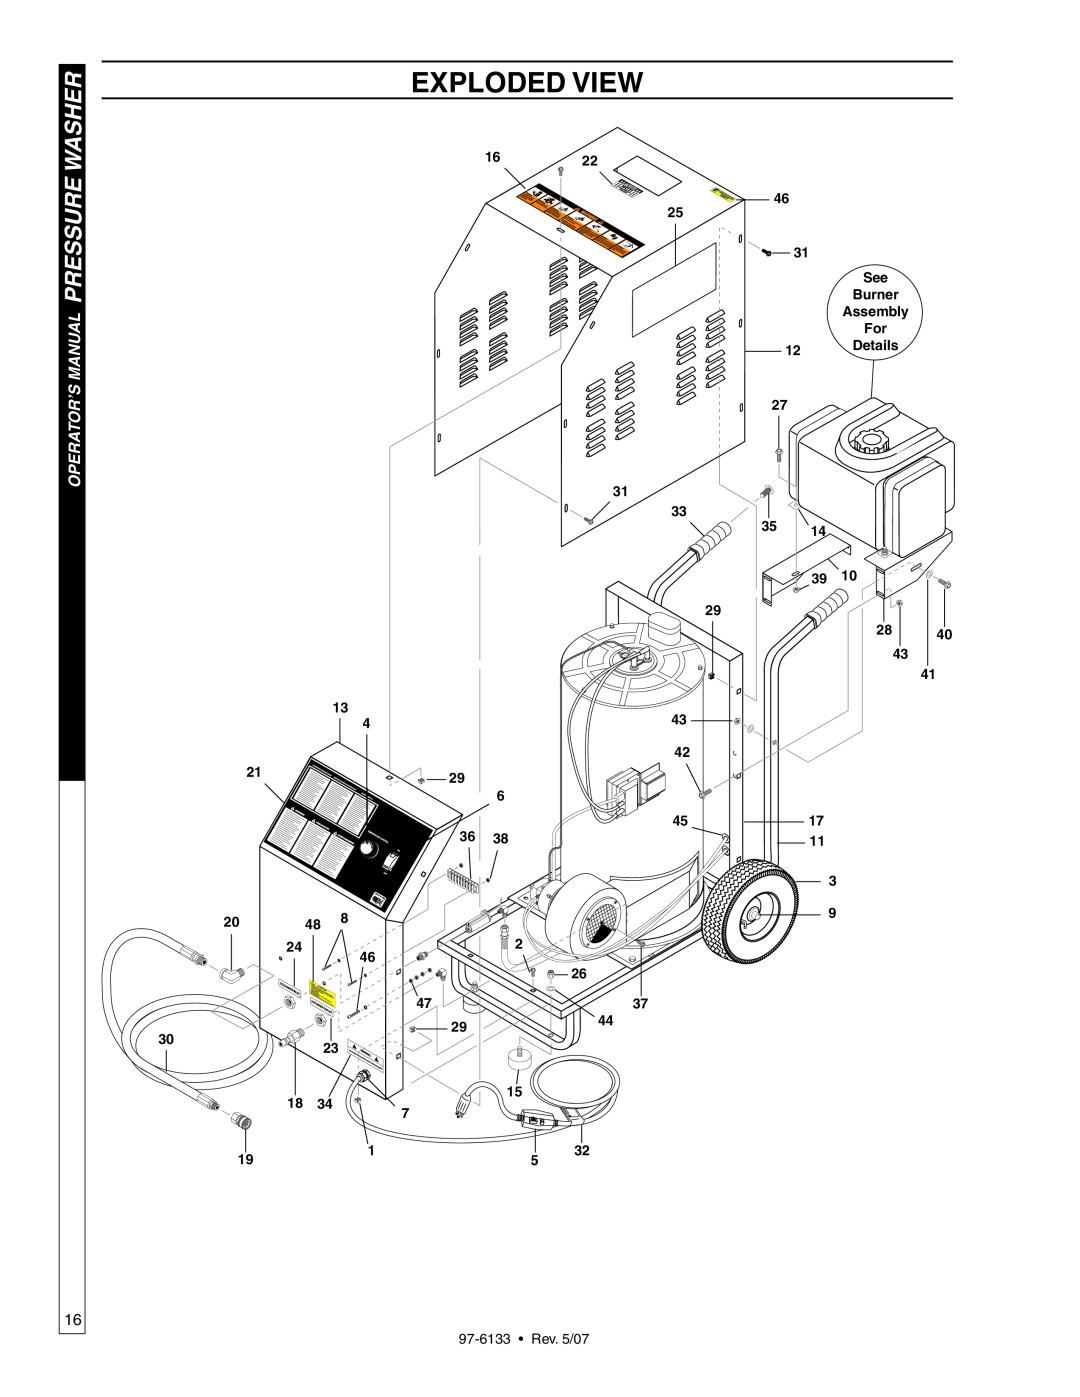 Shark HP-5030D manual Exploded View, Pressure Washer, 1622, See Burner Assembly, Operator’S Manual, For Details 